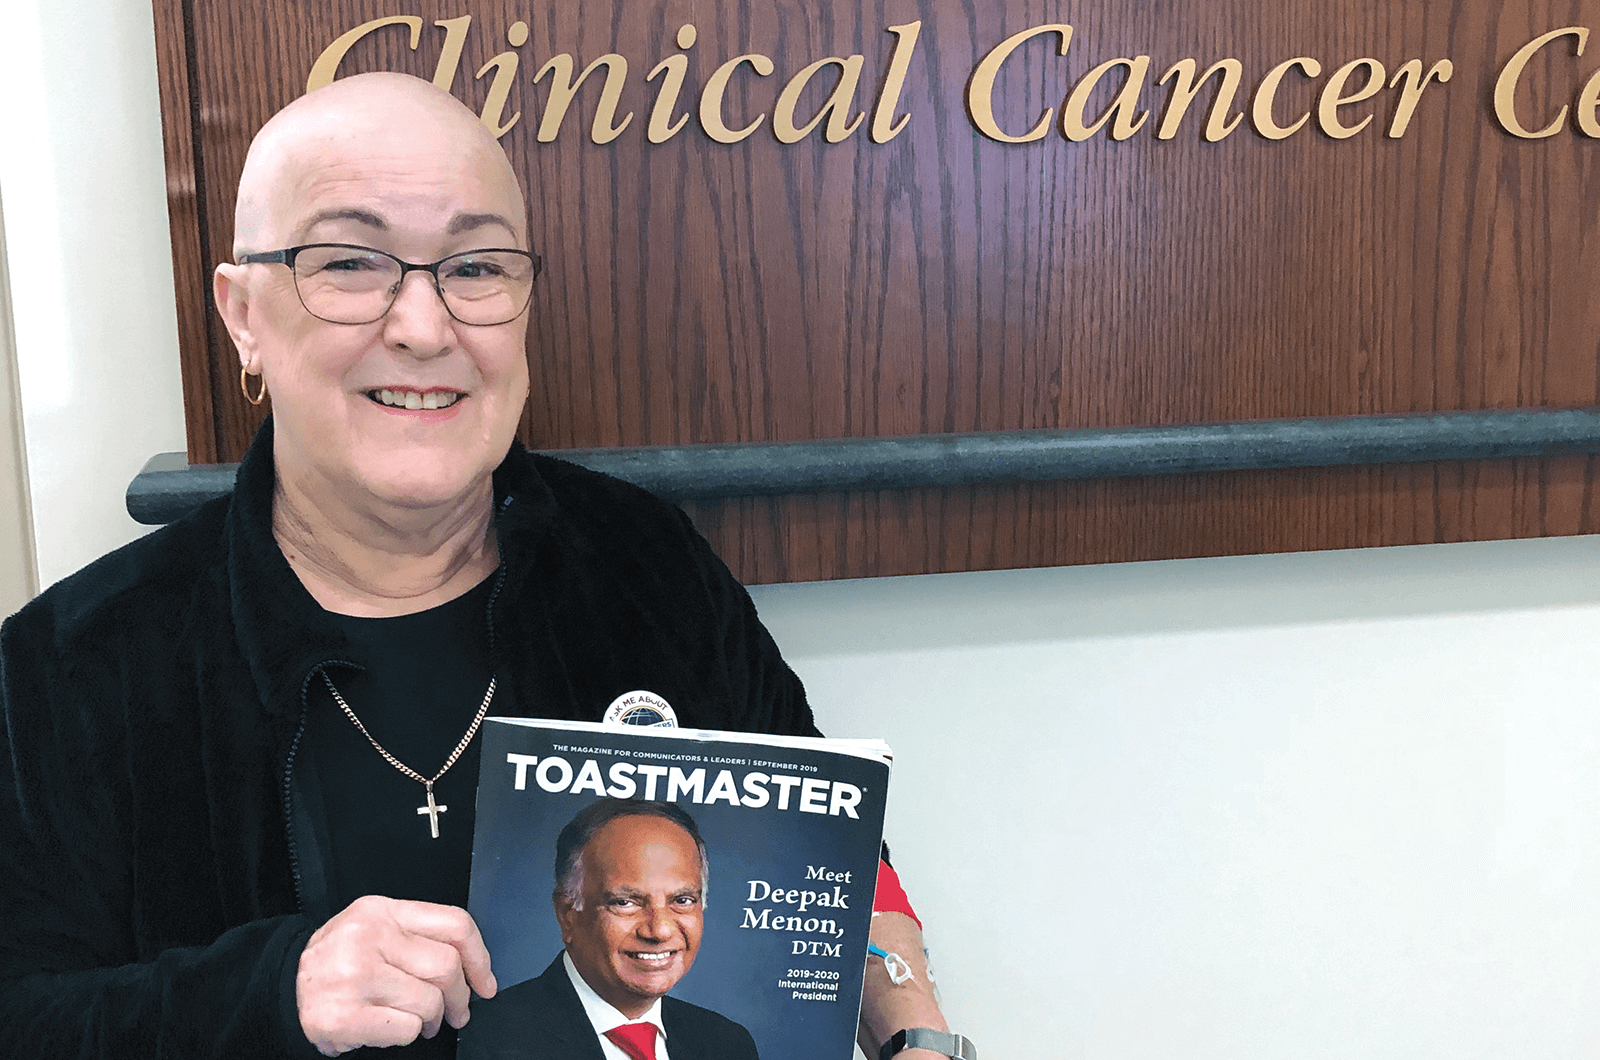 Marilyn McConkey Boyles, DTM, of Cedar Rapids, Iowa, takes her Toastmaster to the University of Iowa Hospital, while receiving cancer treatment.